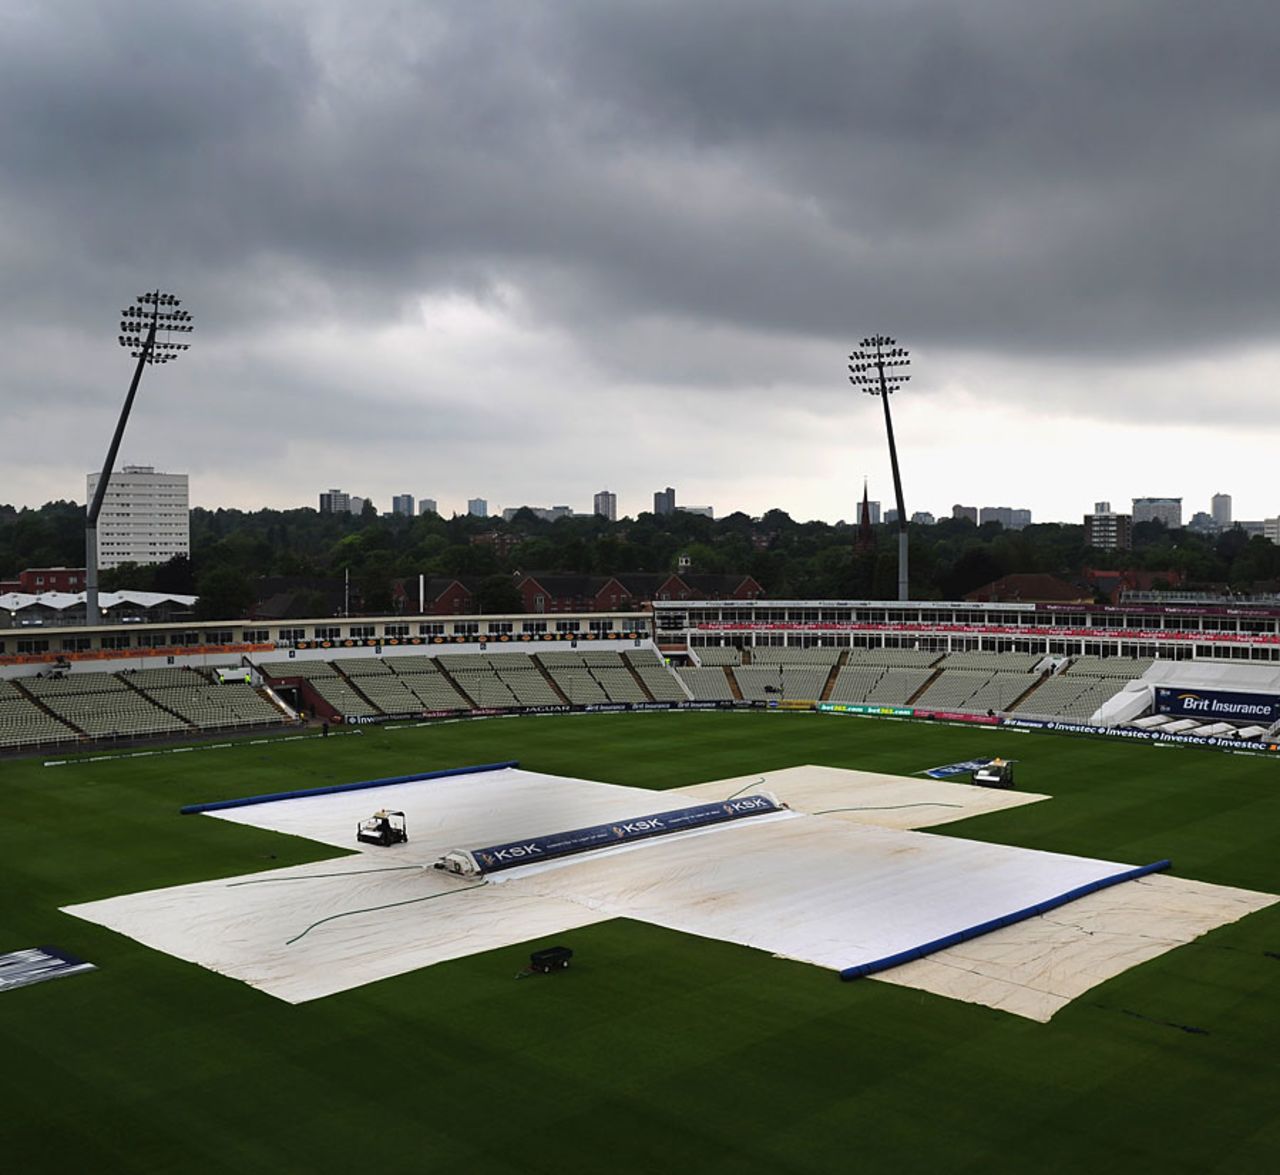 It was another damp scene on the final morning at Edgbaston, England v West Indies, 3rd Test, Edgbaston, 5th day, June 11, 2012